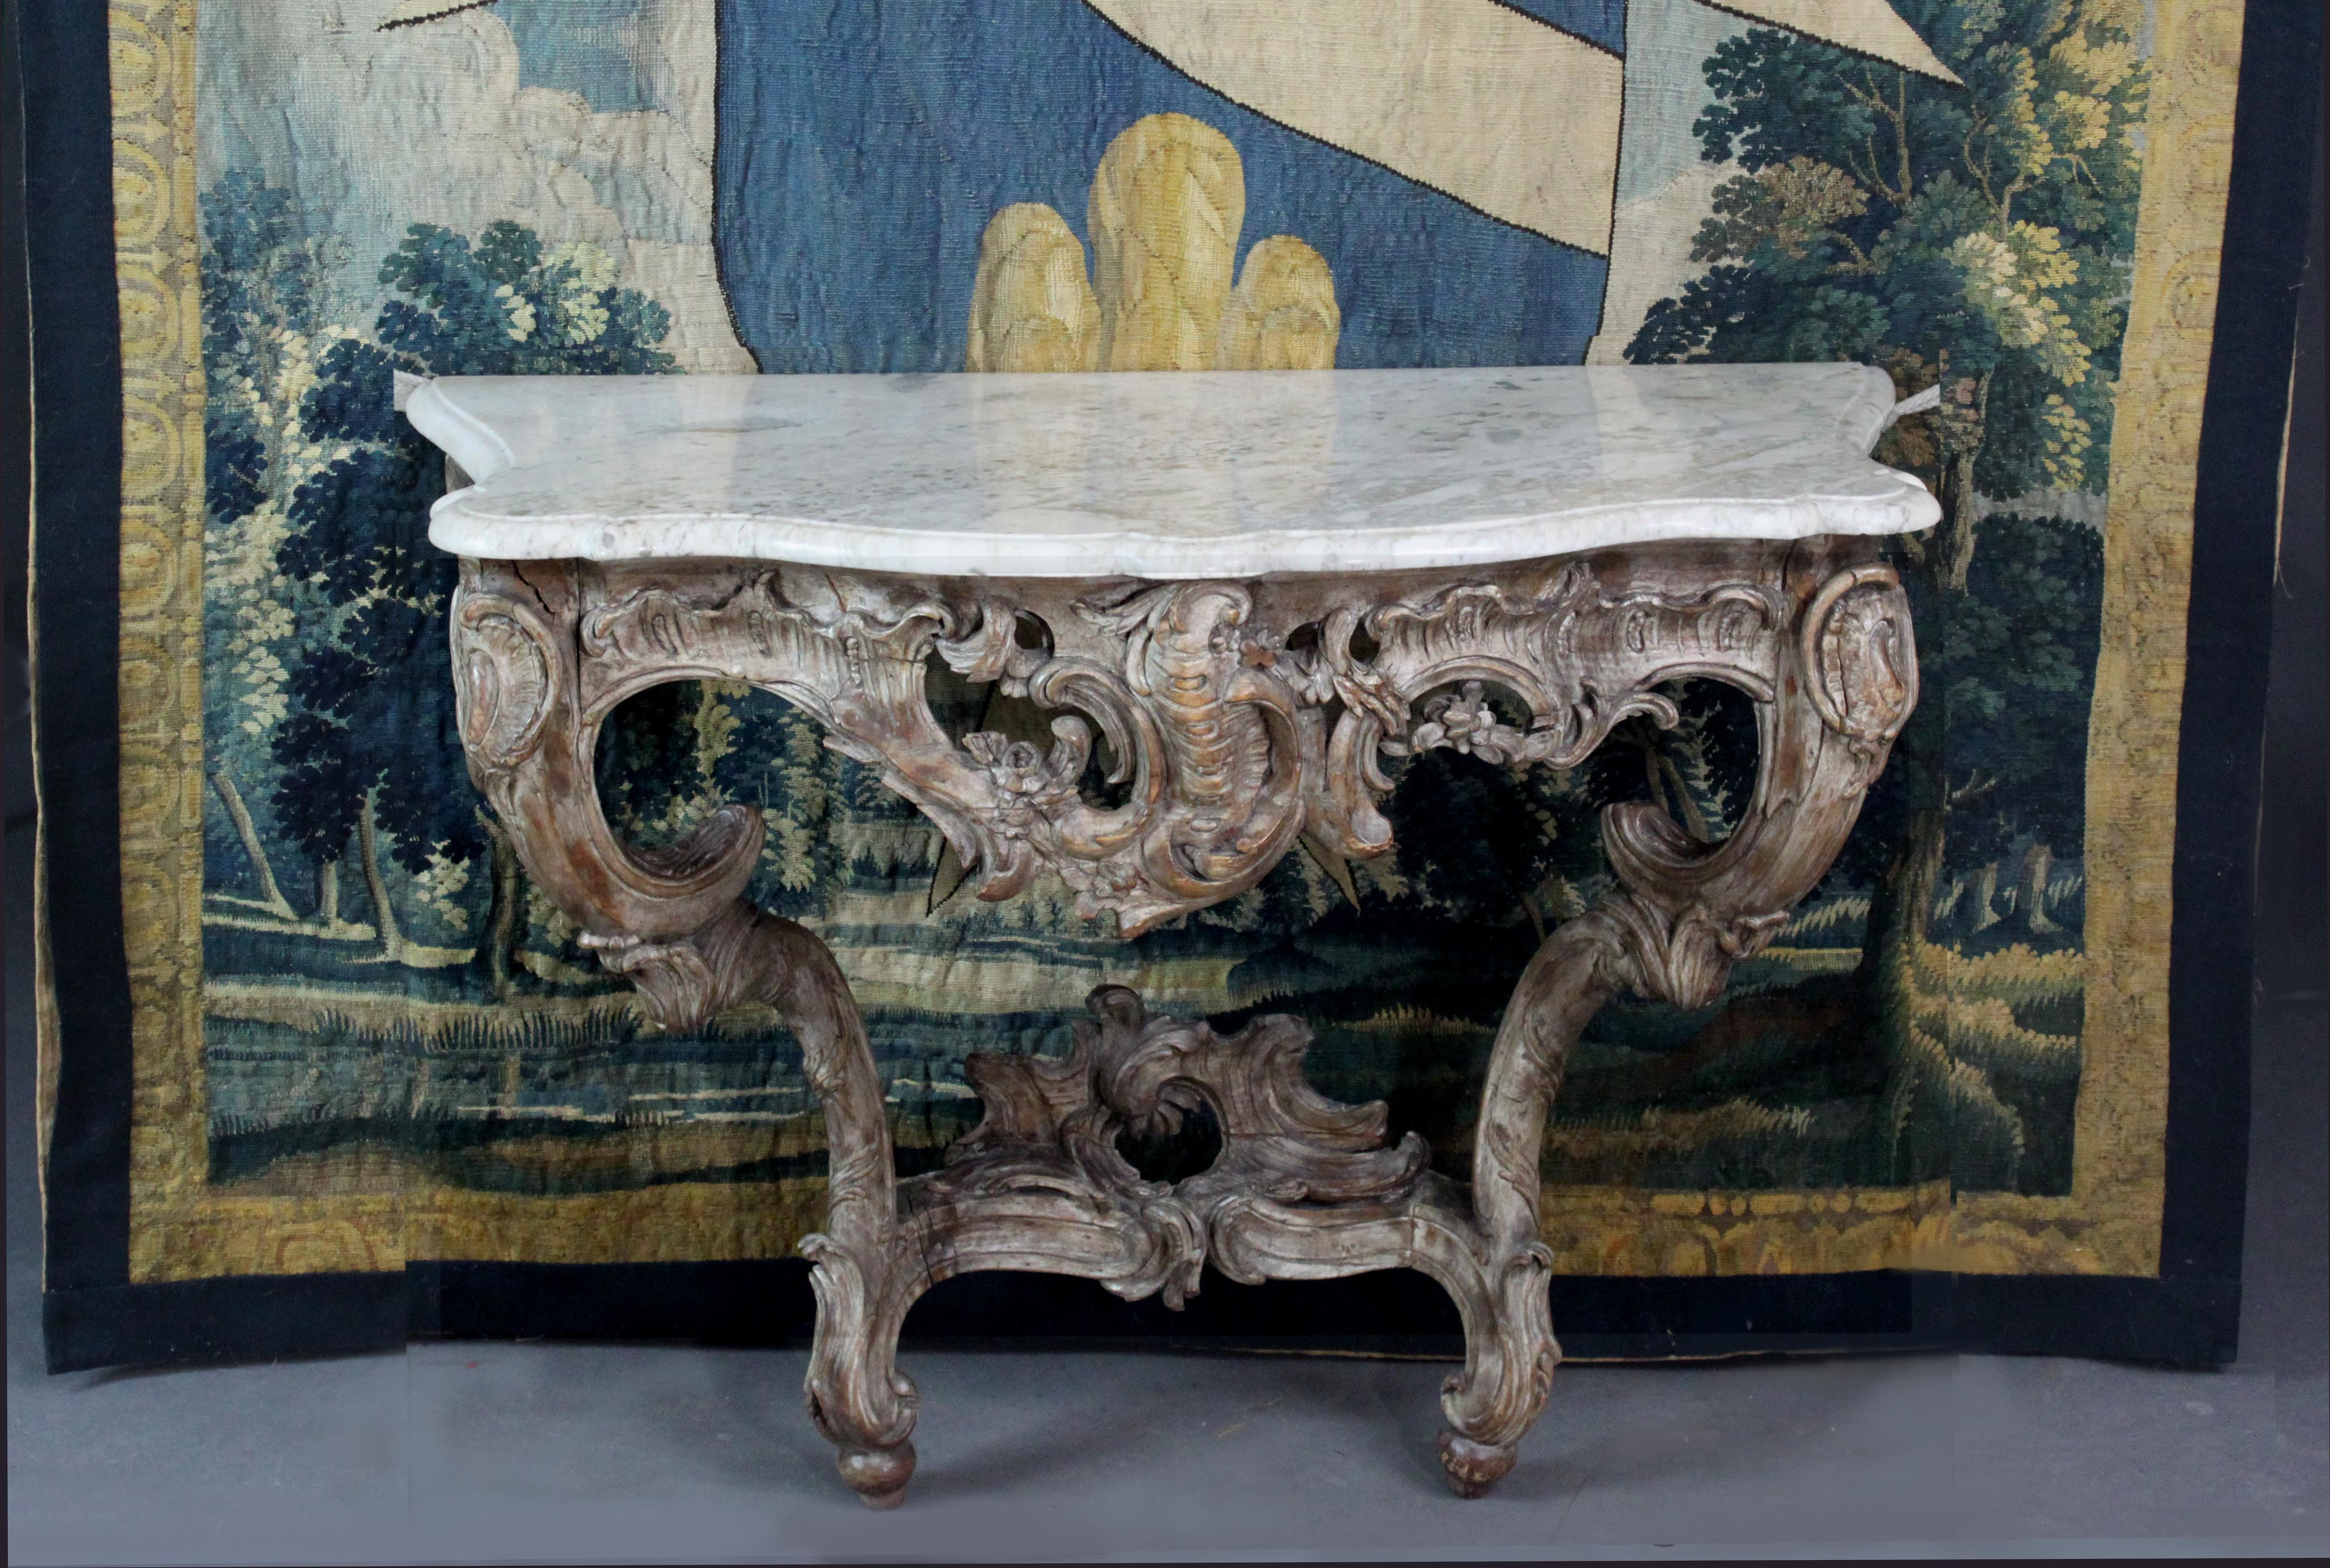 A Louis XV console table with well carved decoration of roccoco scrolls, garlands of flowers and leaves. It would originally have been gilded and now the remains of the gesso give it an attractive grey finish with the fruitwood base wood appearing